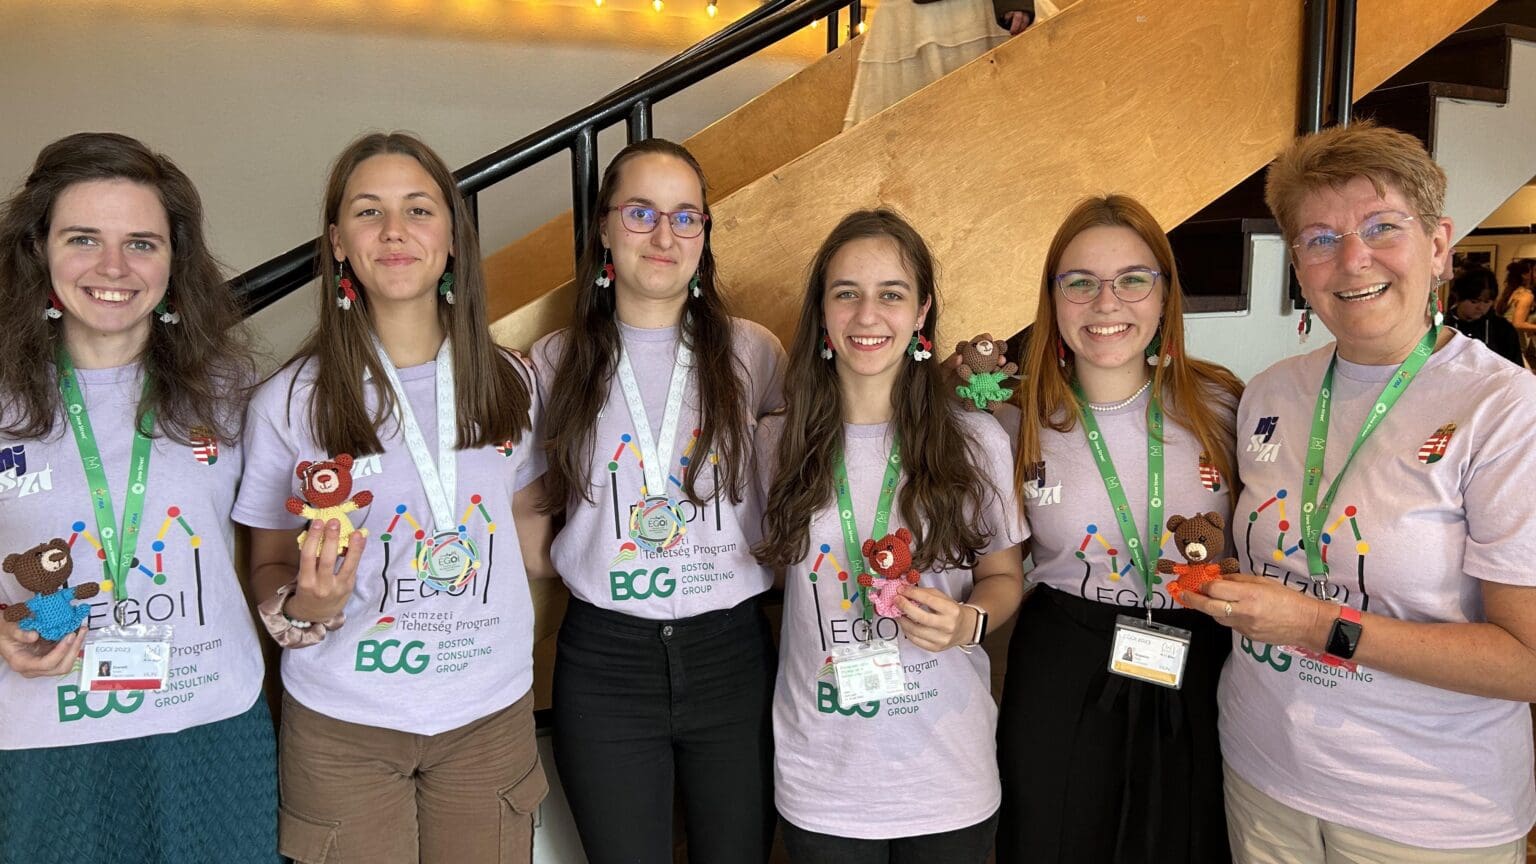 Hungarian Students Take Home Two Medals from European Girls’ Olympiad in Informatics